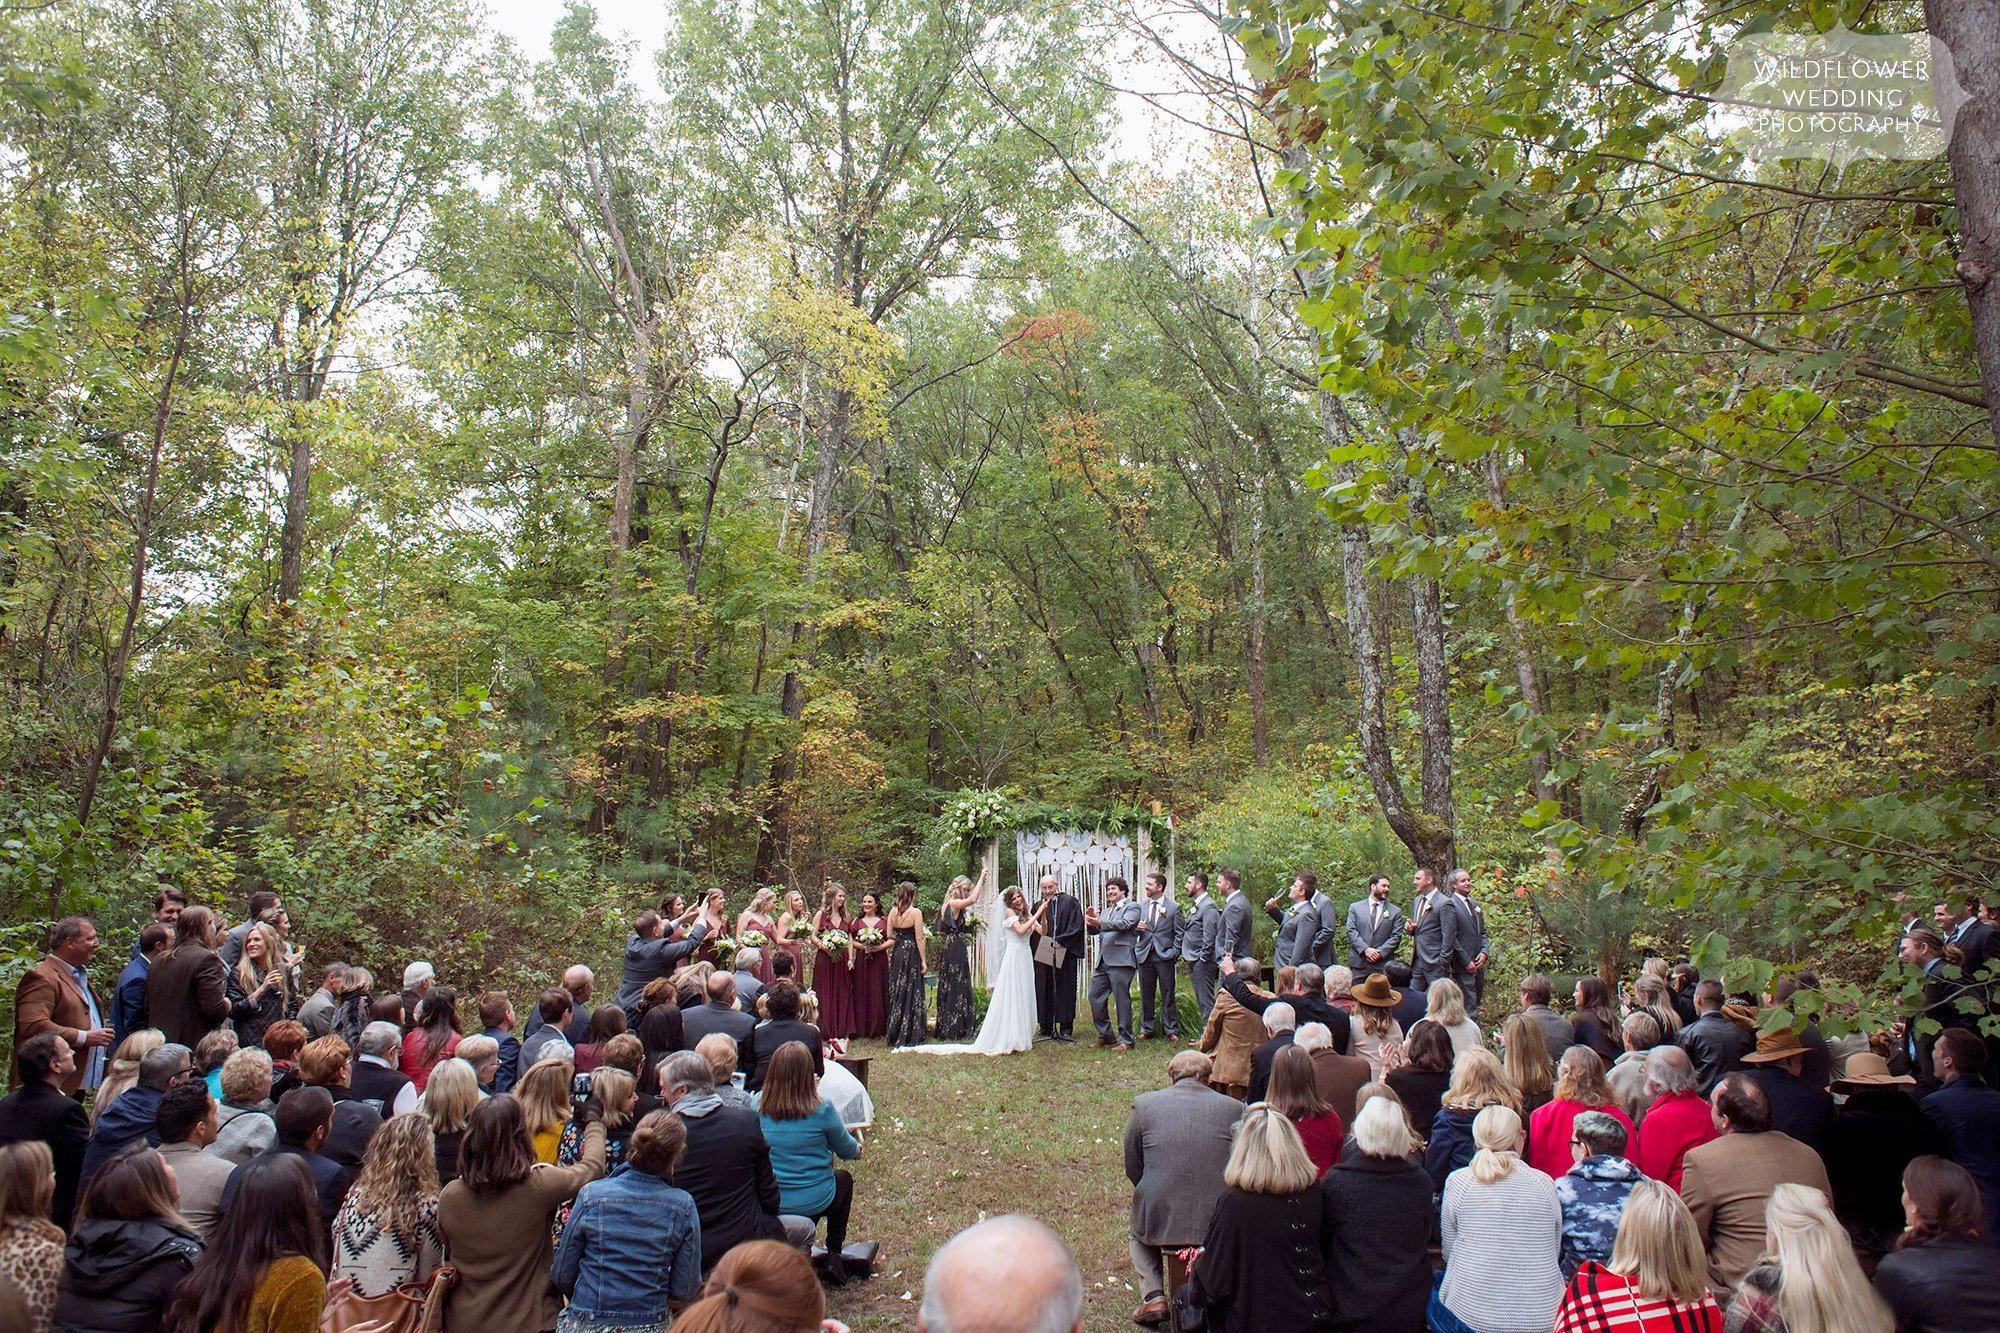 Large outdoor wedding in October at the Little Piney Lodge.